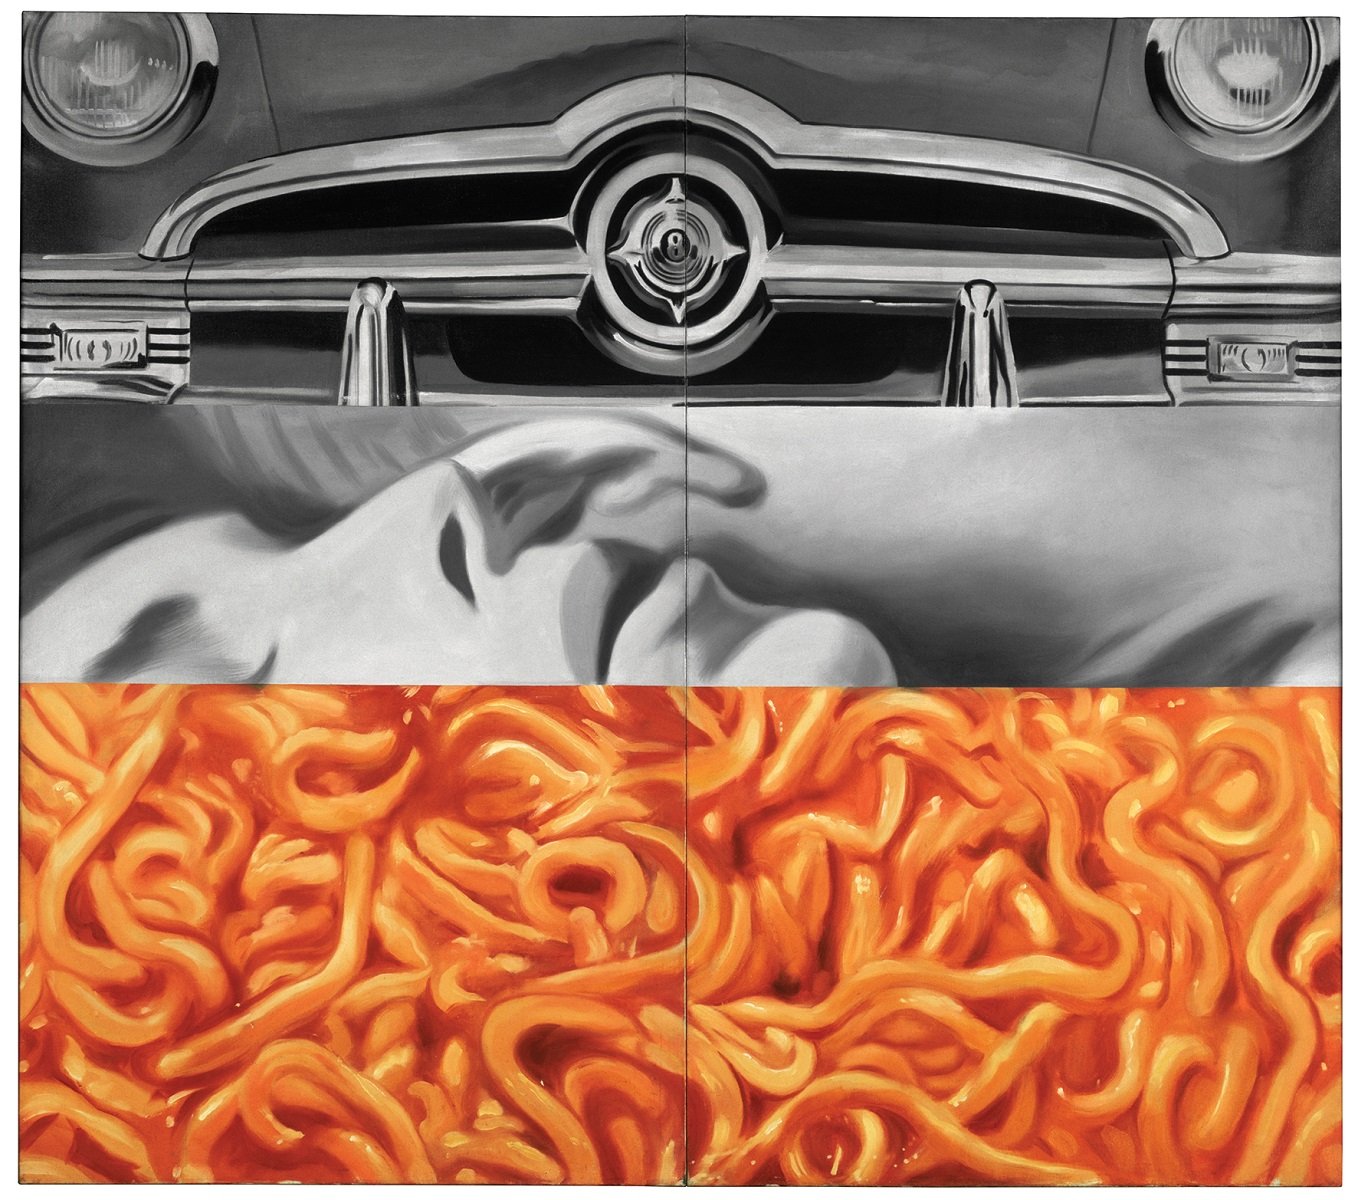 James Rosenquist, I Love You with My Ford, 1961